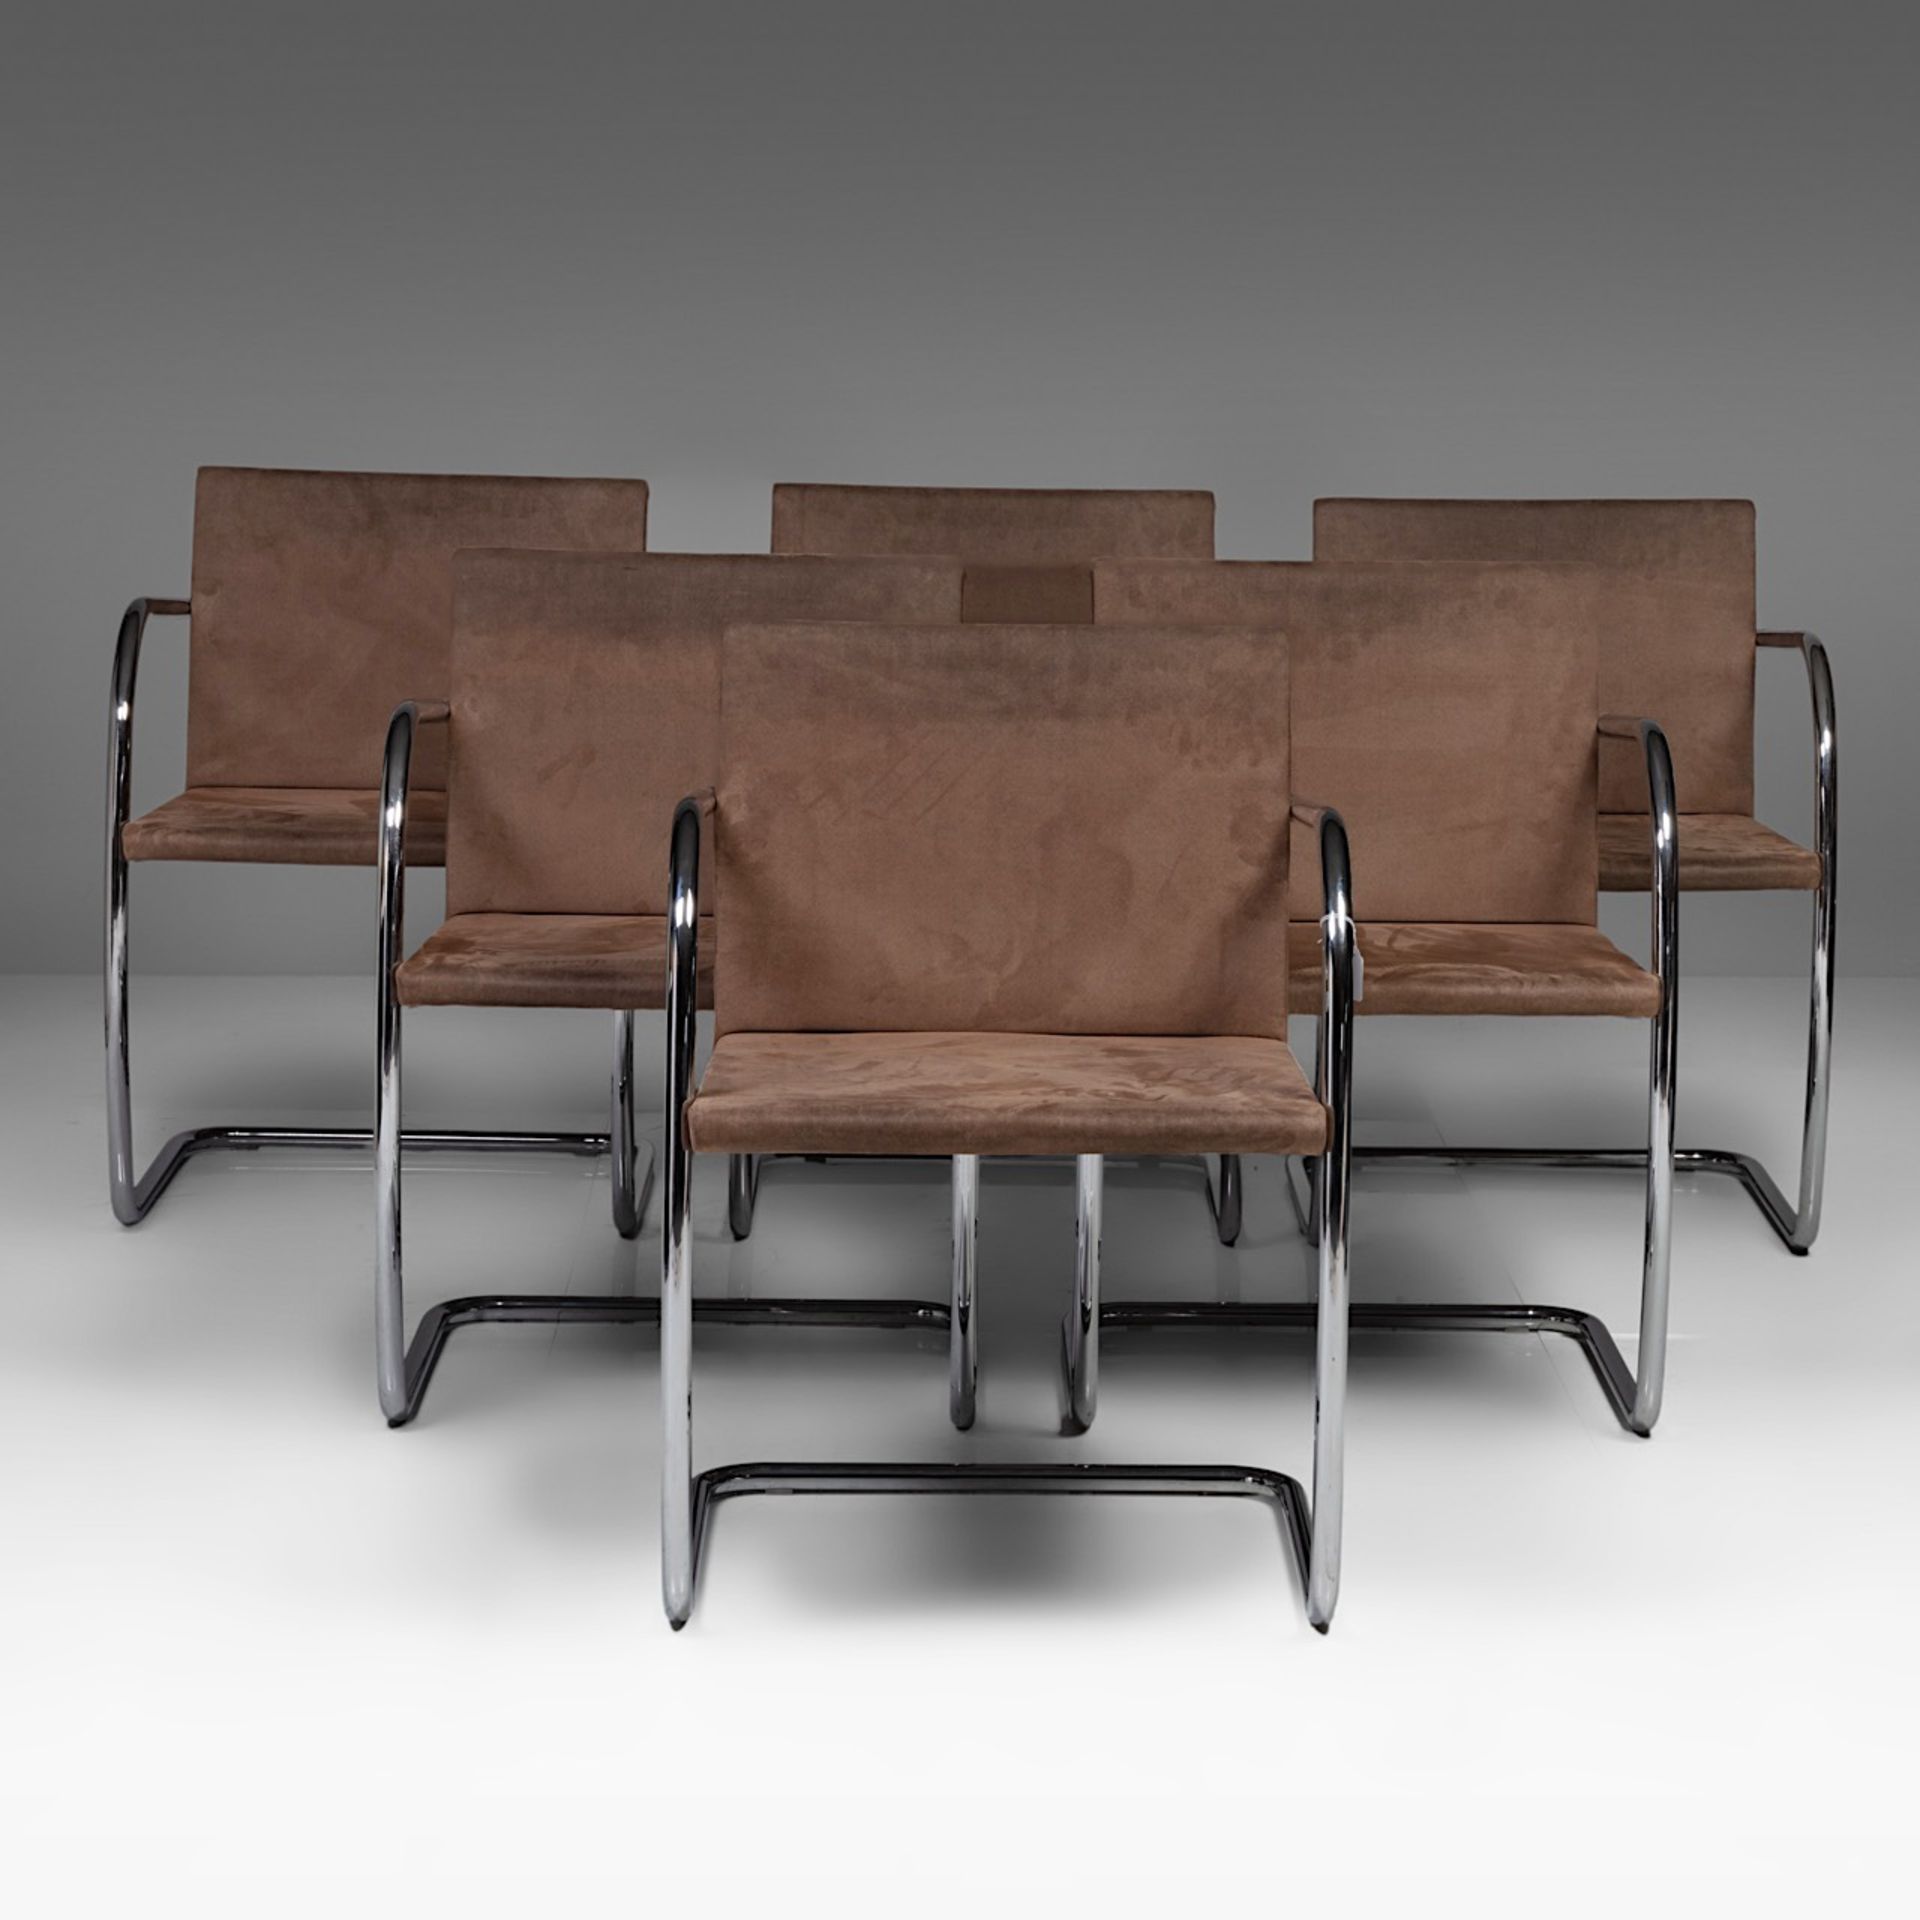 A set of 6 tubular Brno chairs by Ludwig Mies van der Rohe for Knoll, marked, H 78 - W 55 cm